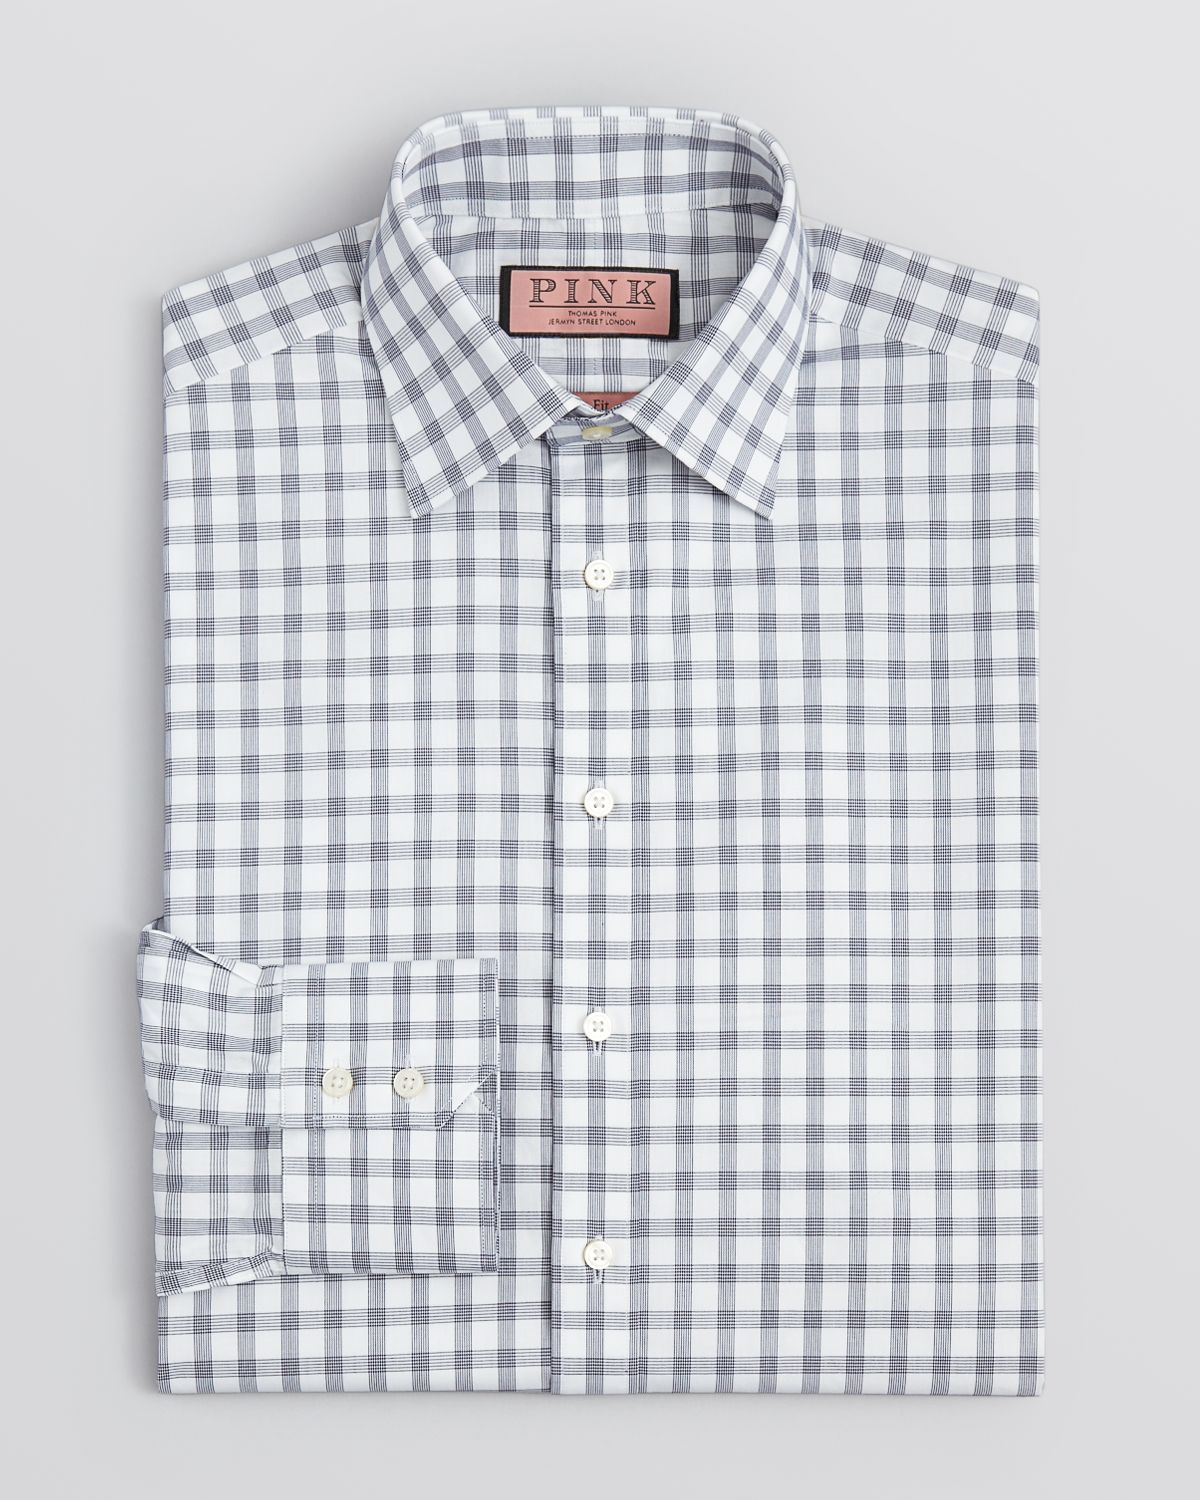 Lyst - Thomas Pink Leng Check Dress Shirt Contemporary Fit in Blue for Men